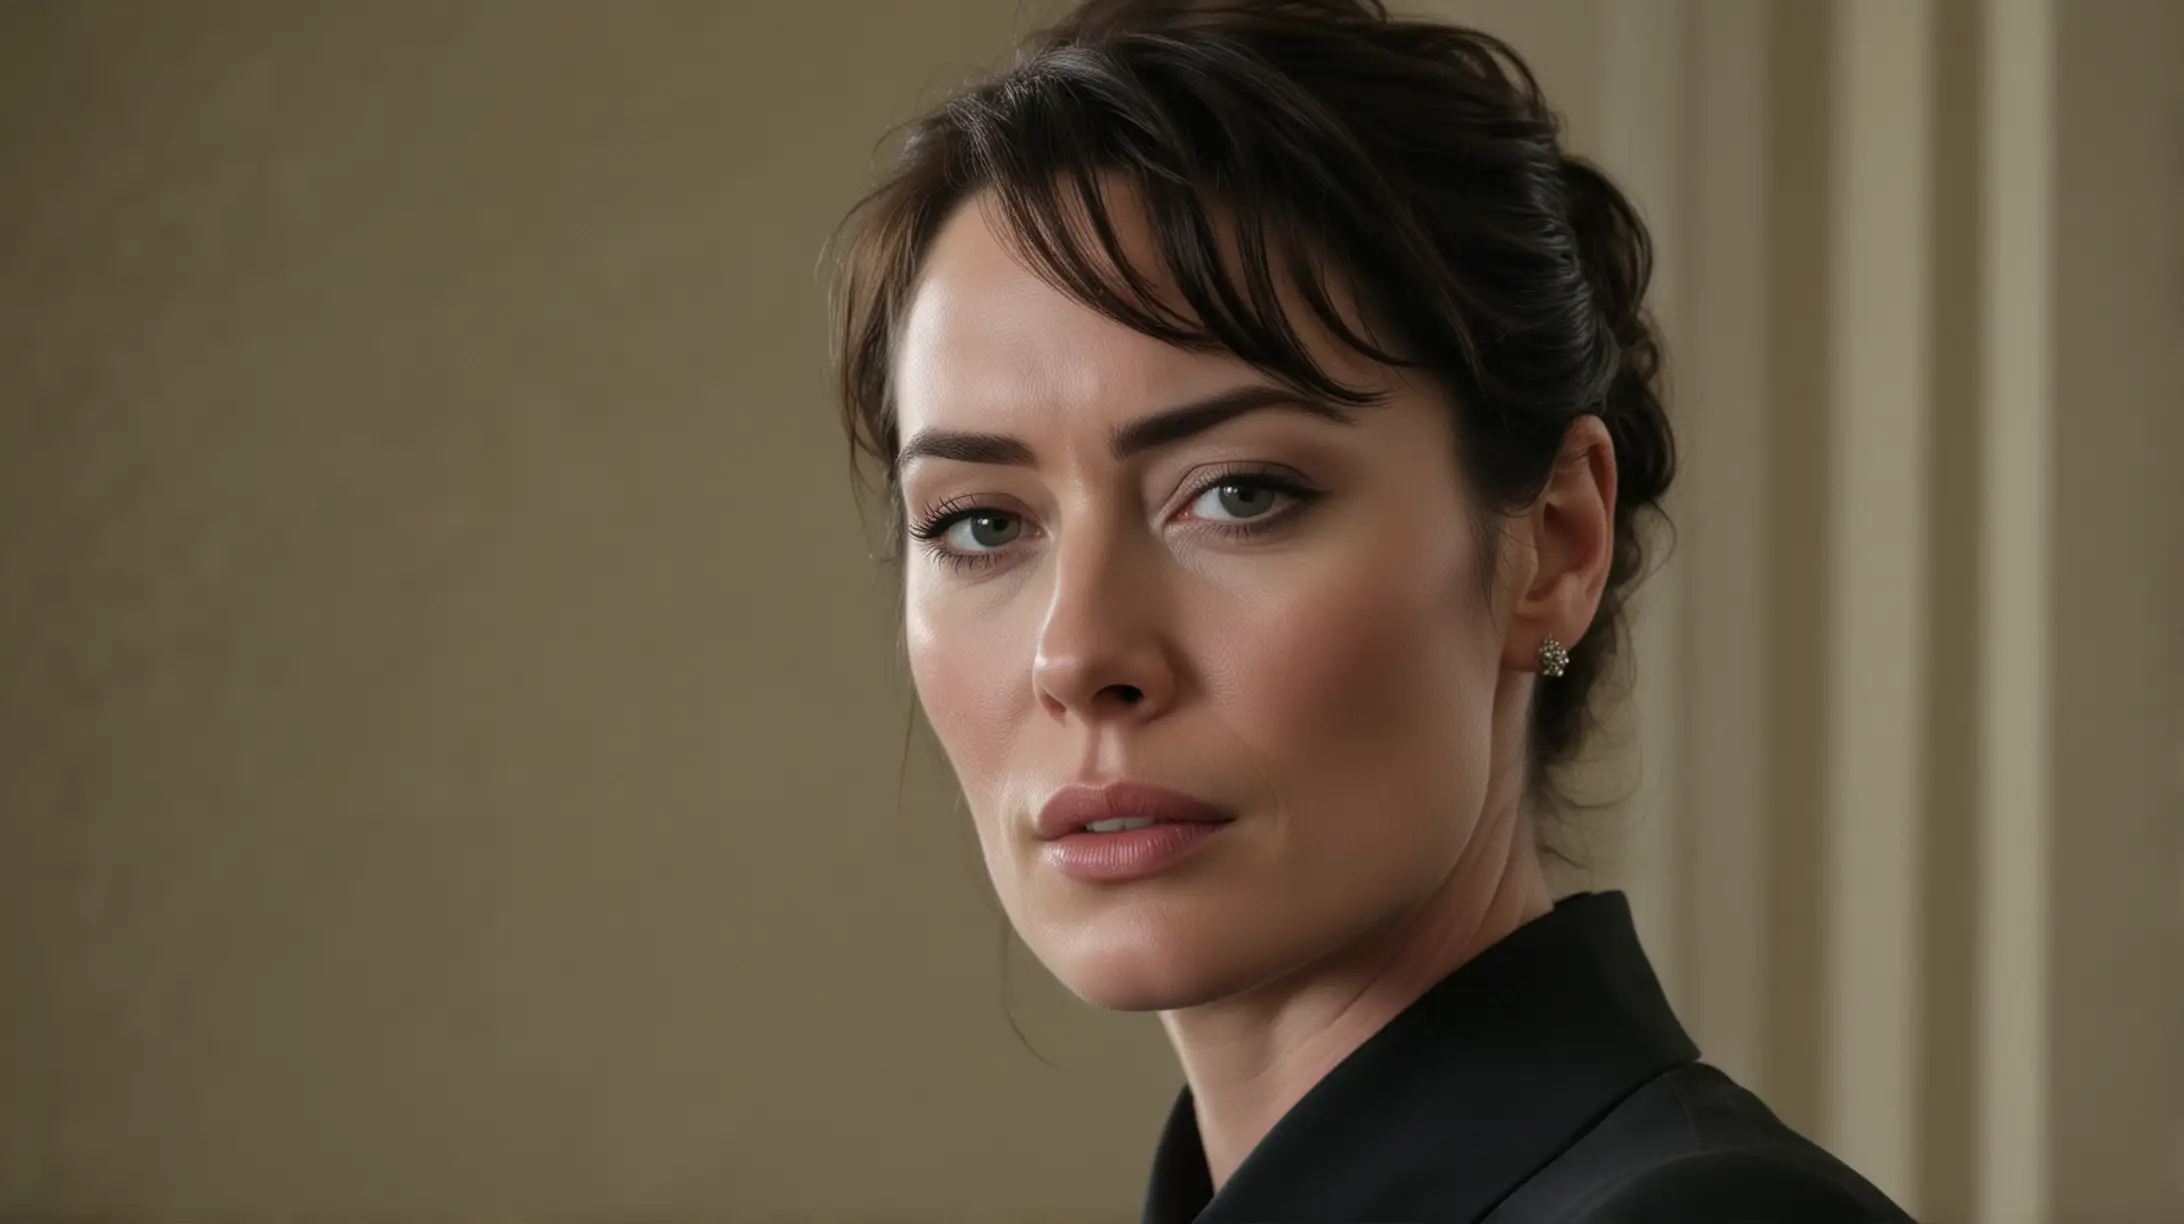 I need a image of female character similar to a movie still taken from a movie scene, look similar to Lena Headey a determined, resilient women with a complex past. She is in her early forties with sharp features, cold businesswoman. The focus is tight on Griffin, employing a short depth of field to blur the opulent, yet oppressive background, 


